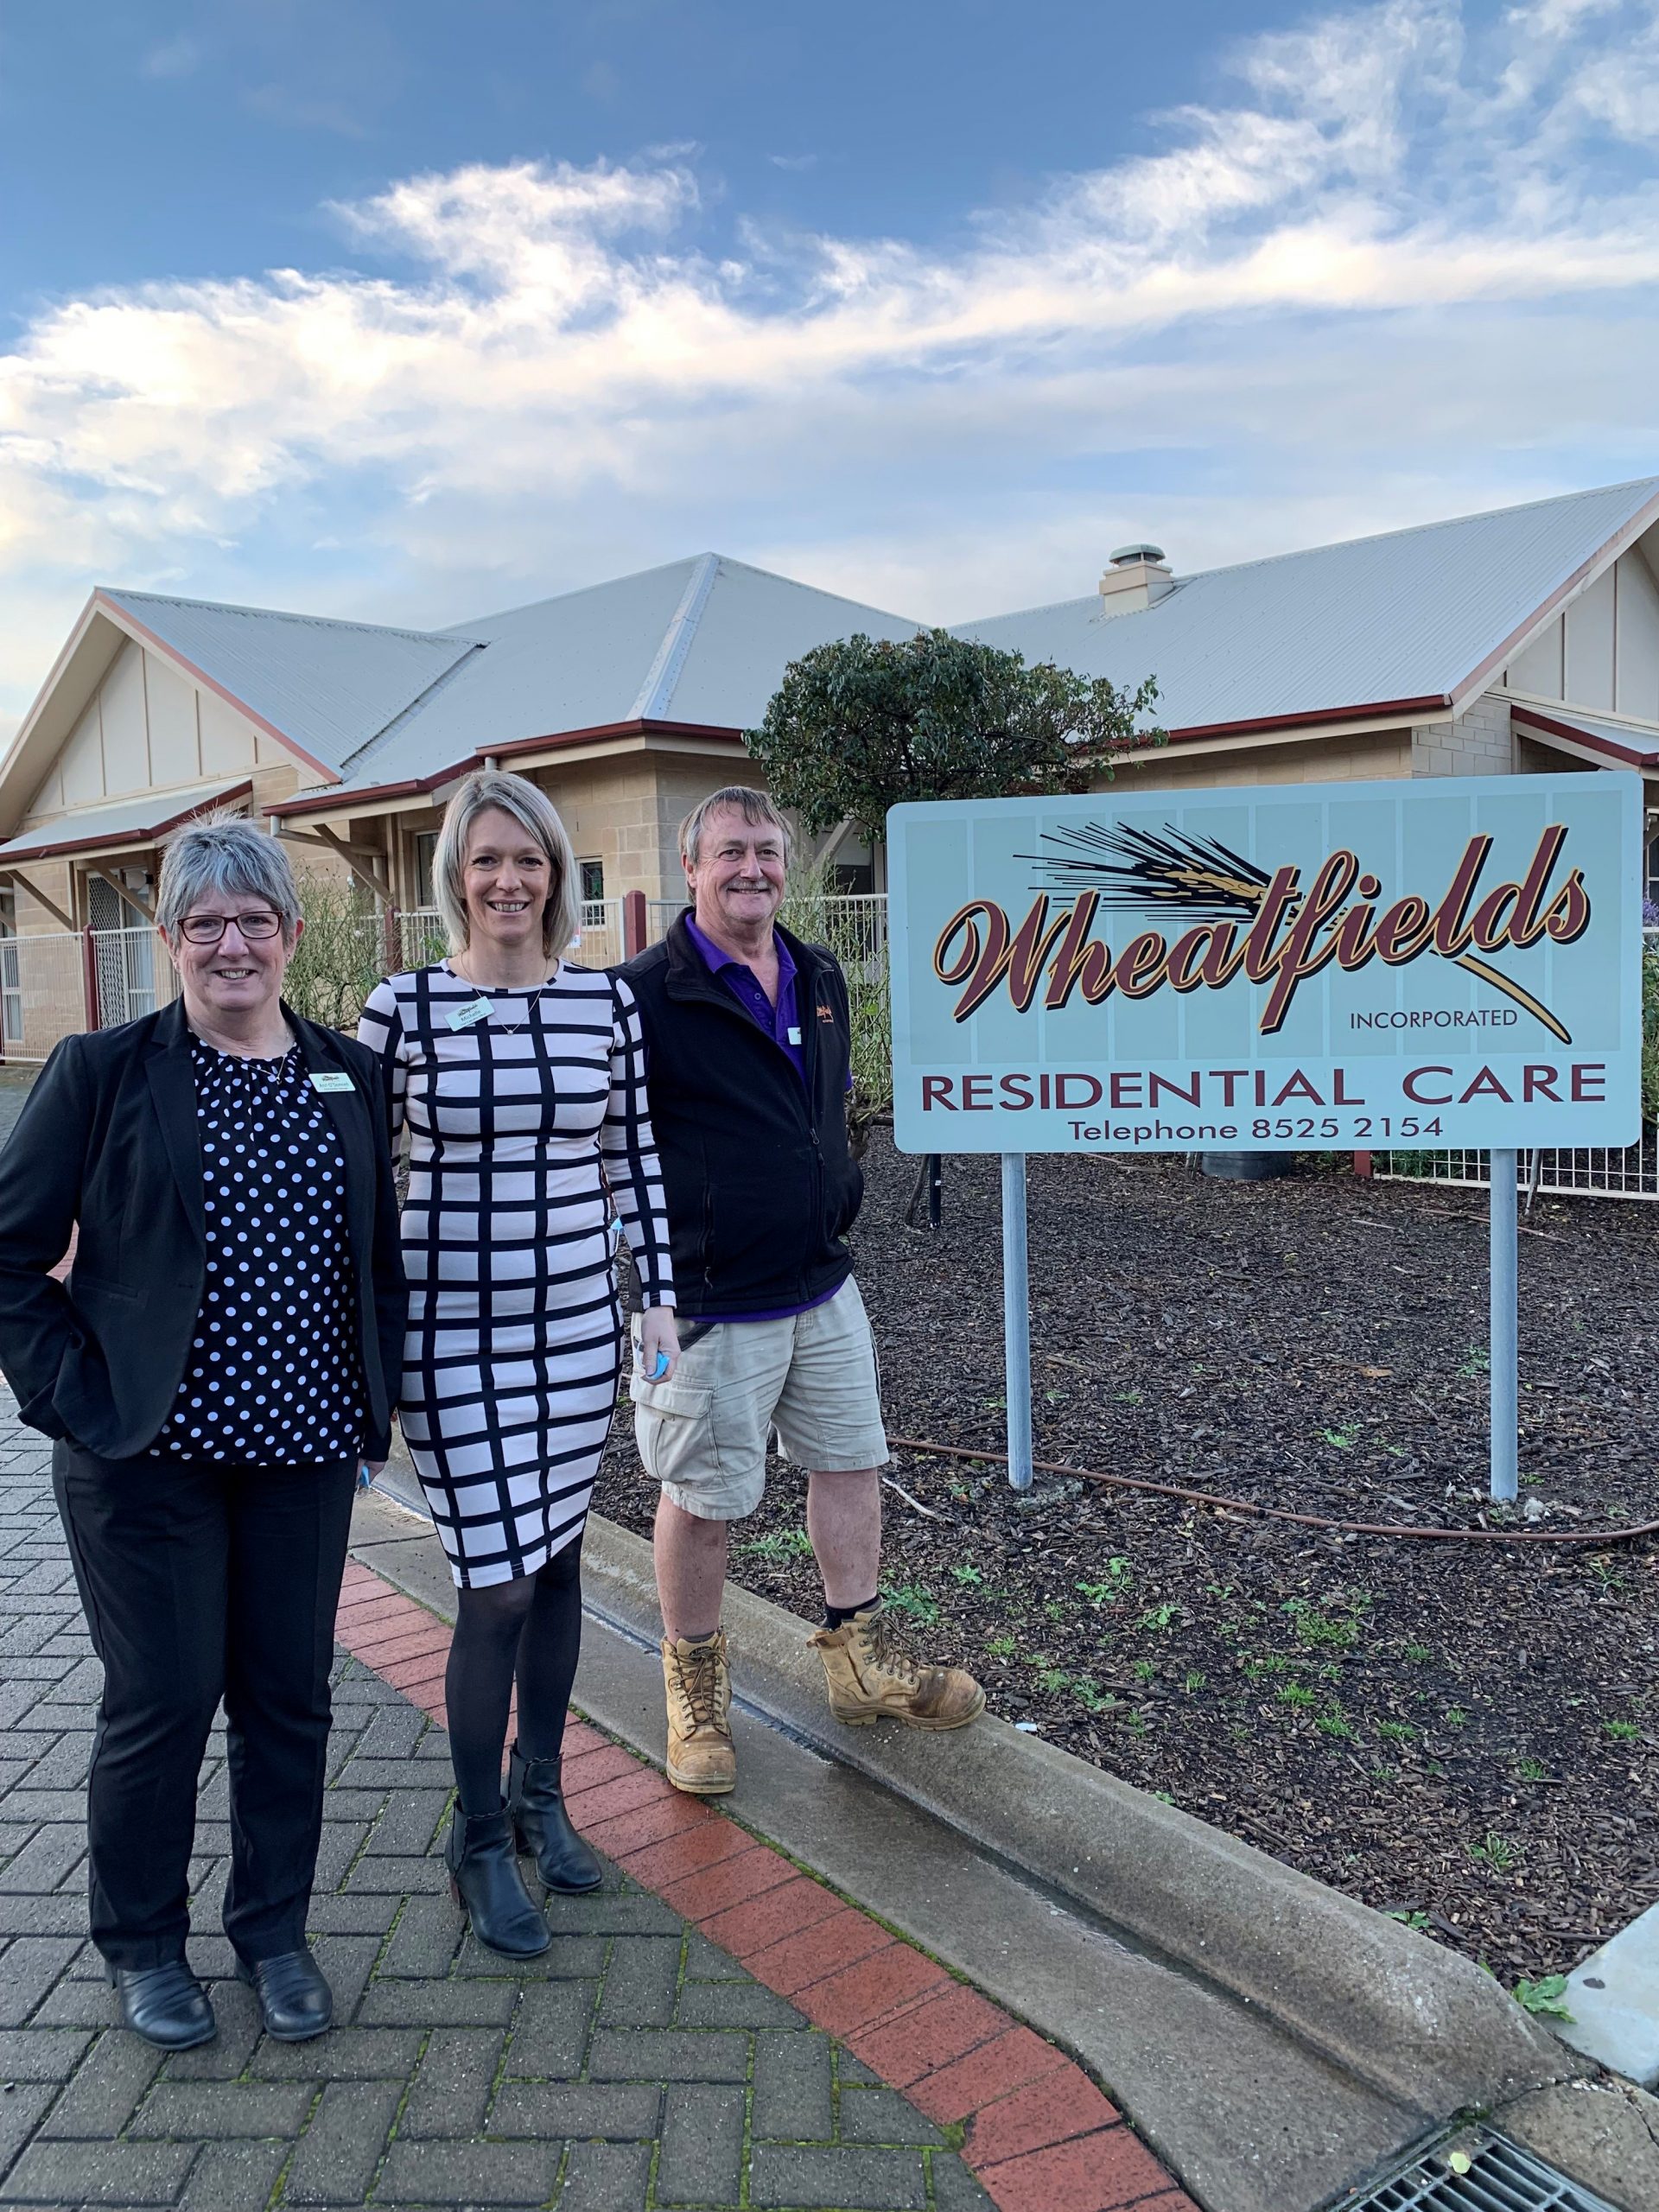 Record infrastructure funding for aged care in Barker